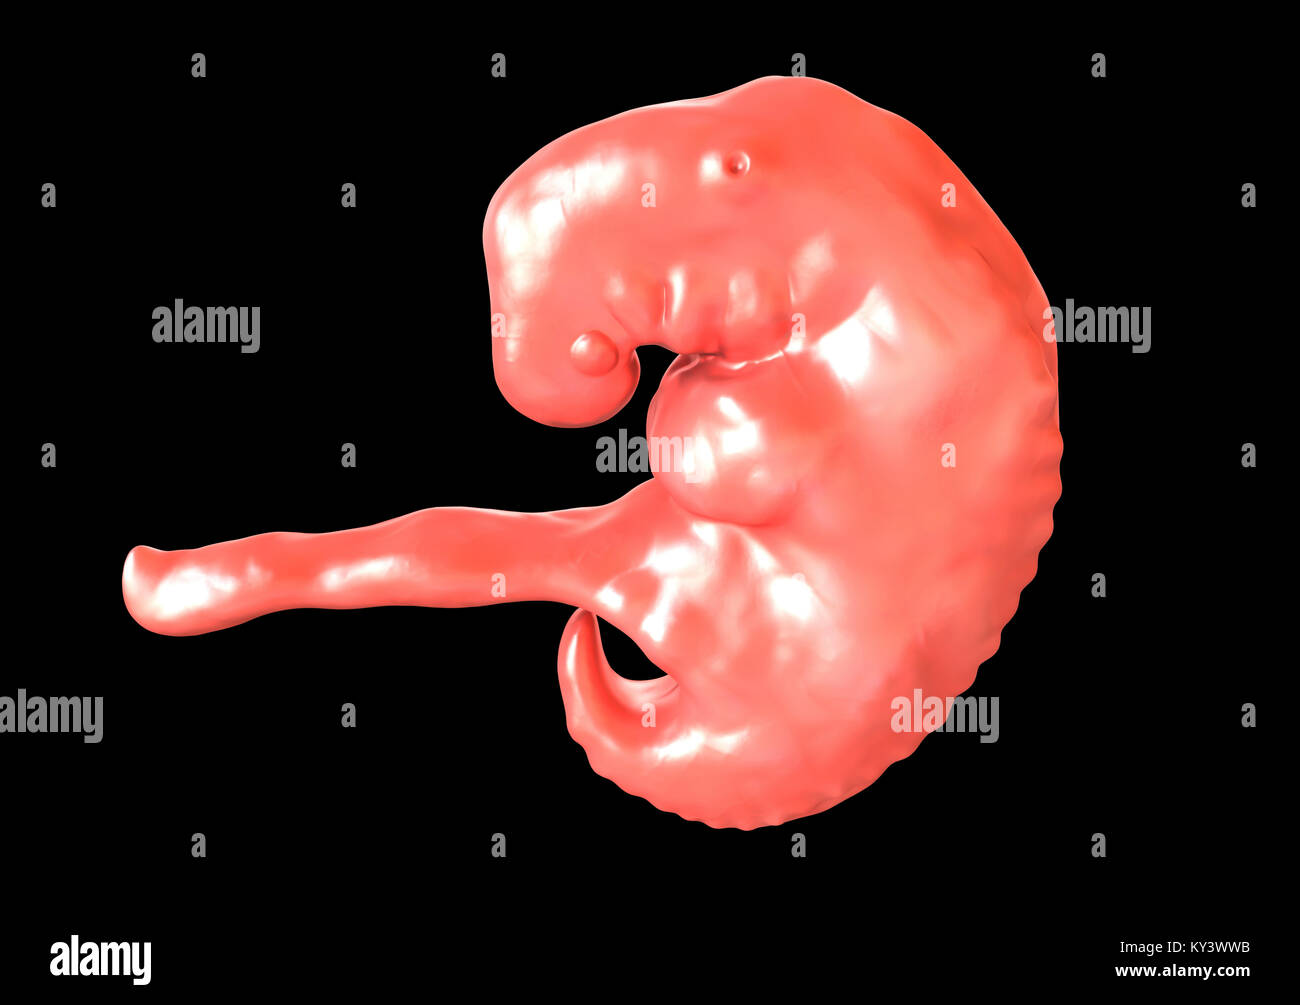 Embryo during the middle part of the 4th week, computer illustration. Stock Photo